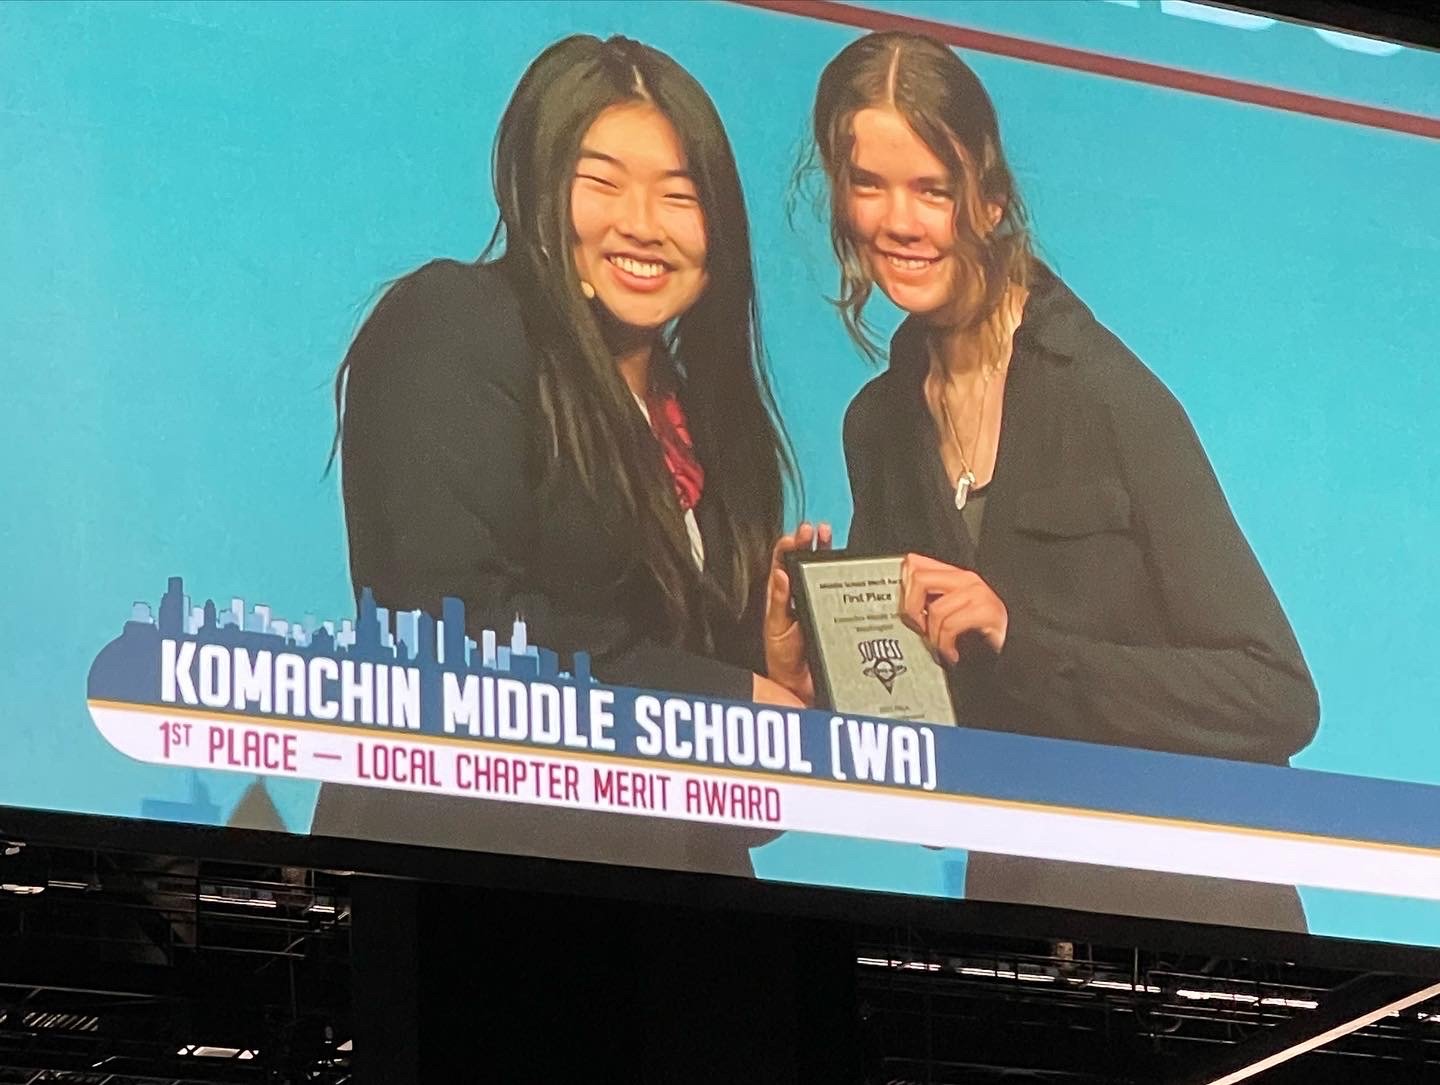 FBLA National Secretary, Grace Zhang (left) with KMS Chapter Secretary Alyssa Childers are shown on the projection screen at the McCormick Place Convention Center in Chicago at the FBLA conference receiving the Award for the school chapter.